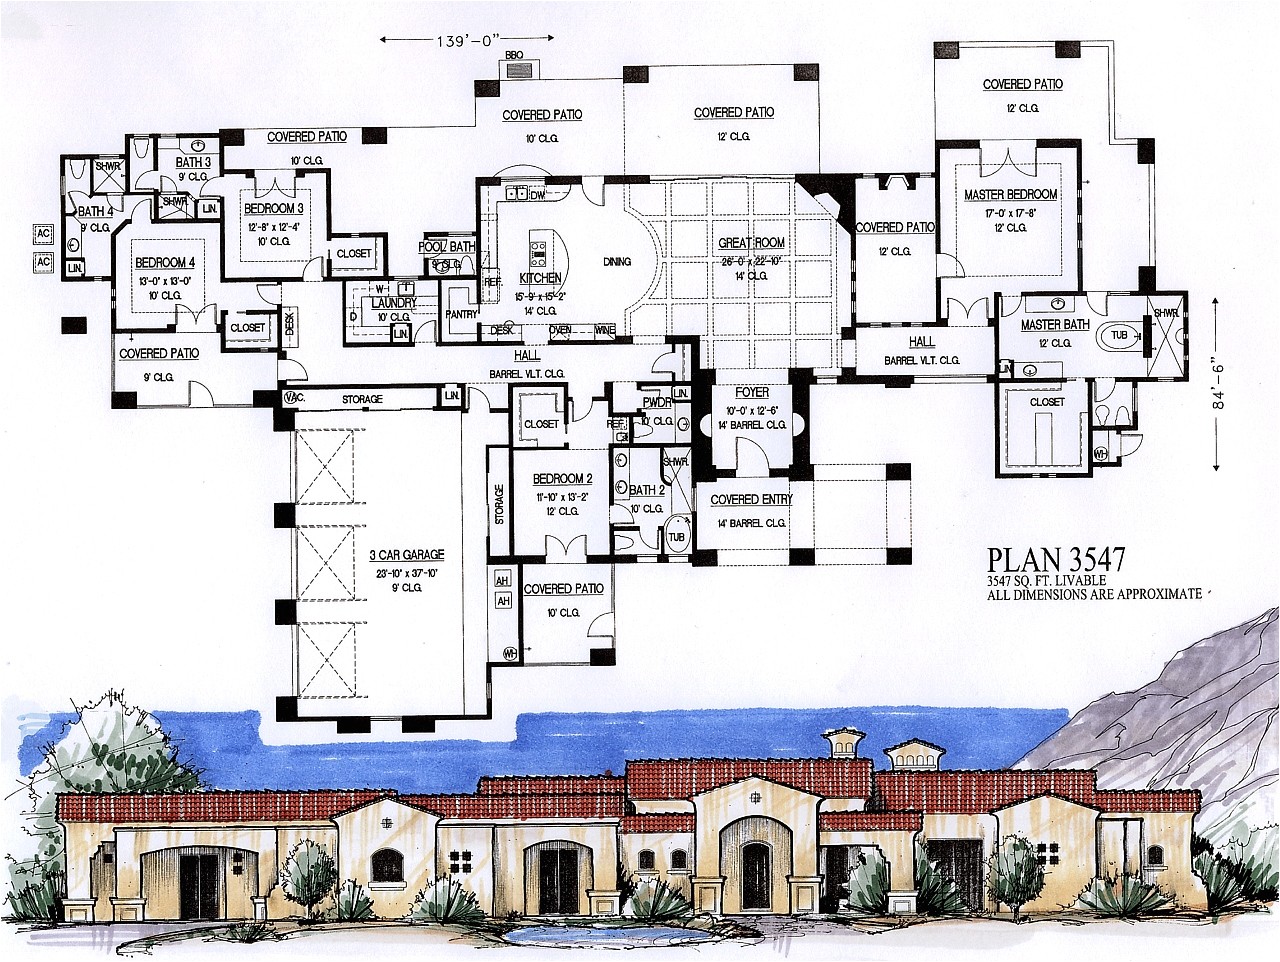 5000 Square Foot Home Plans 5000 Square Foot House Plan House Plan 2017